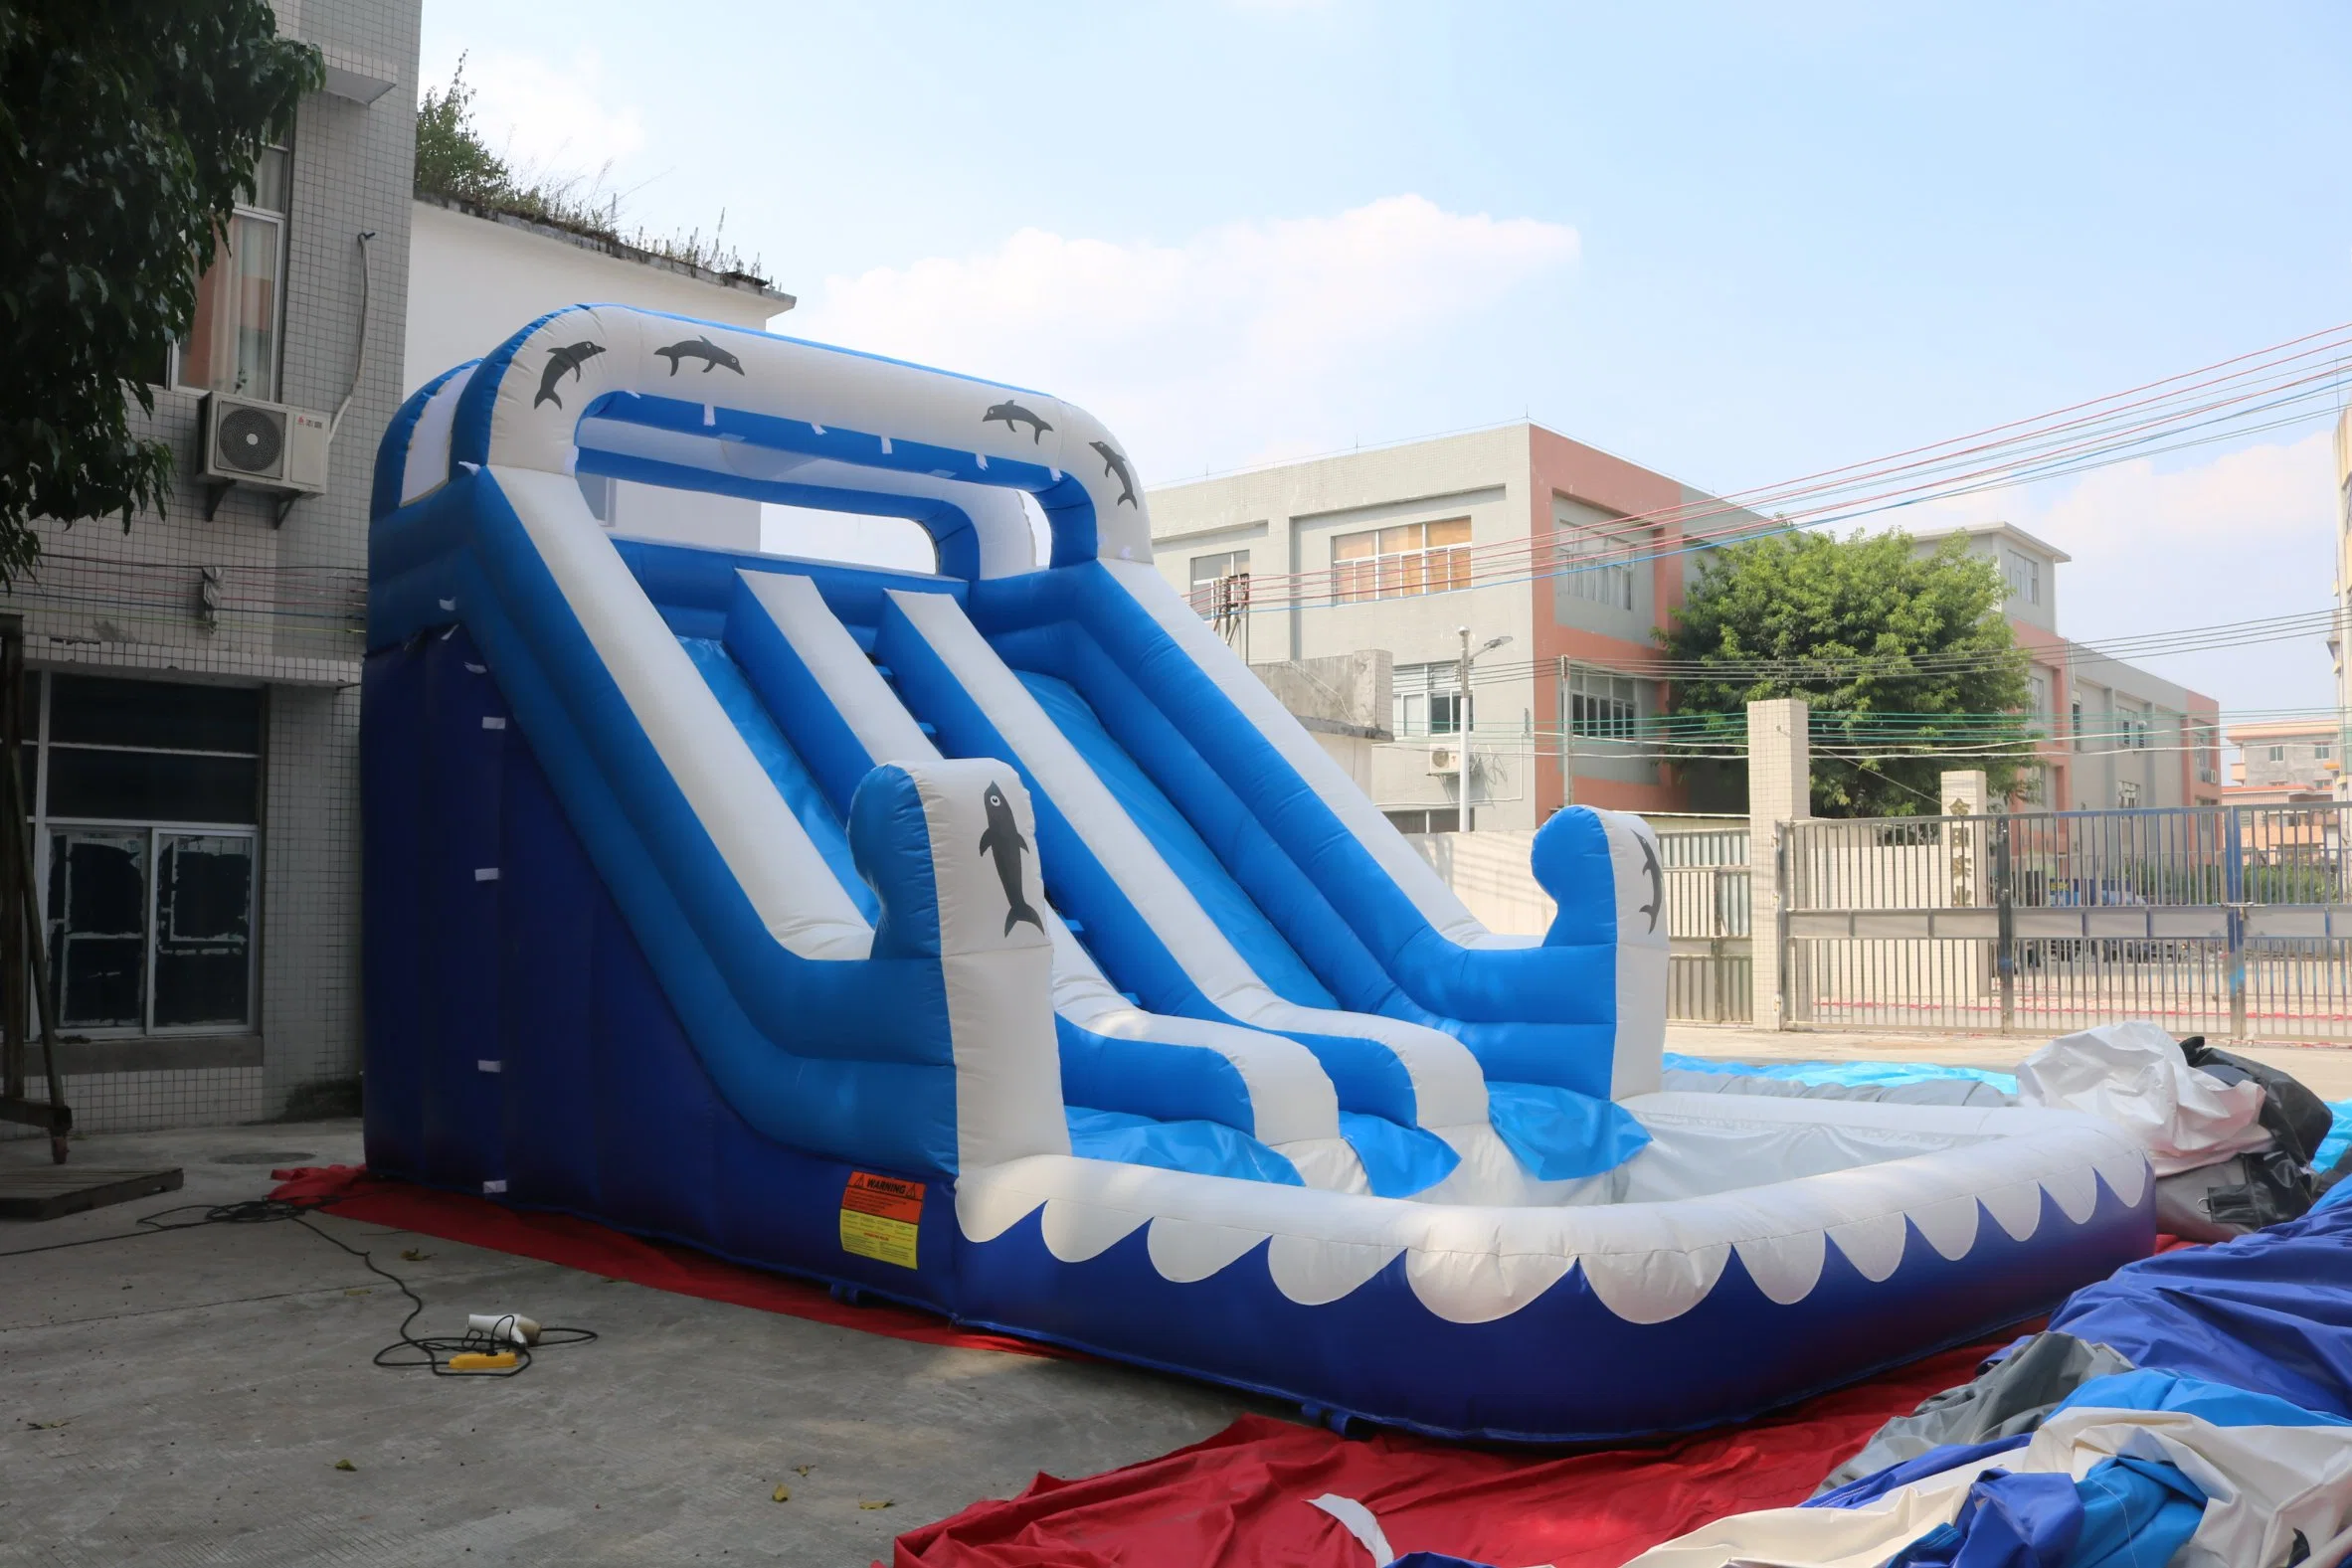 Funny Outdoor Amusement Inflatable Playground Using Water and Dry Slide